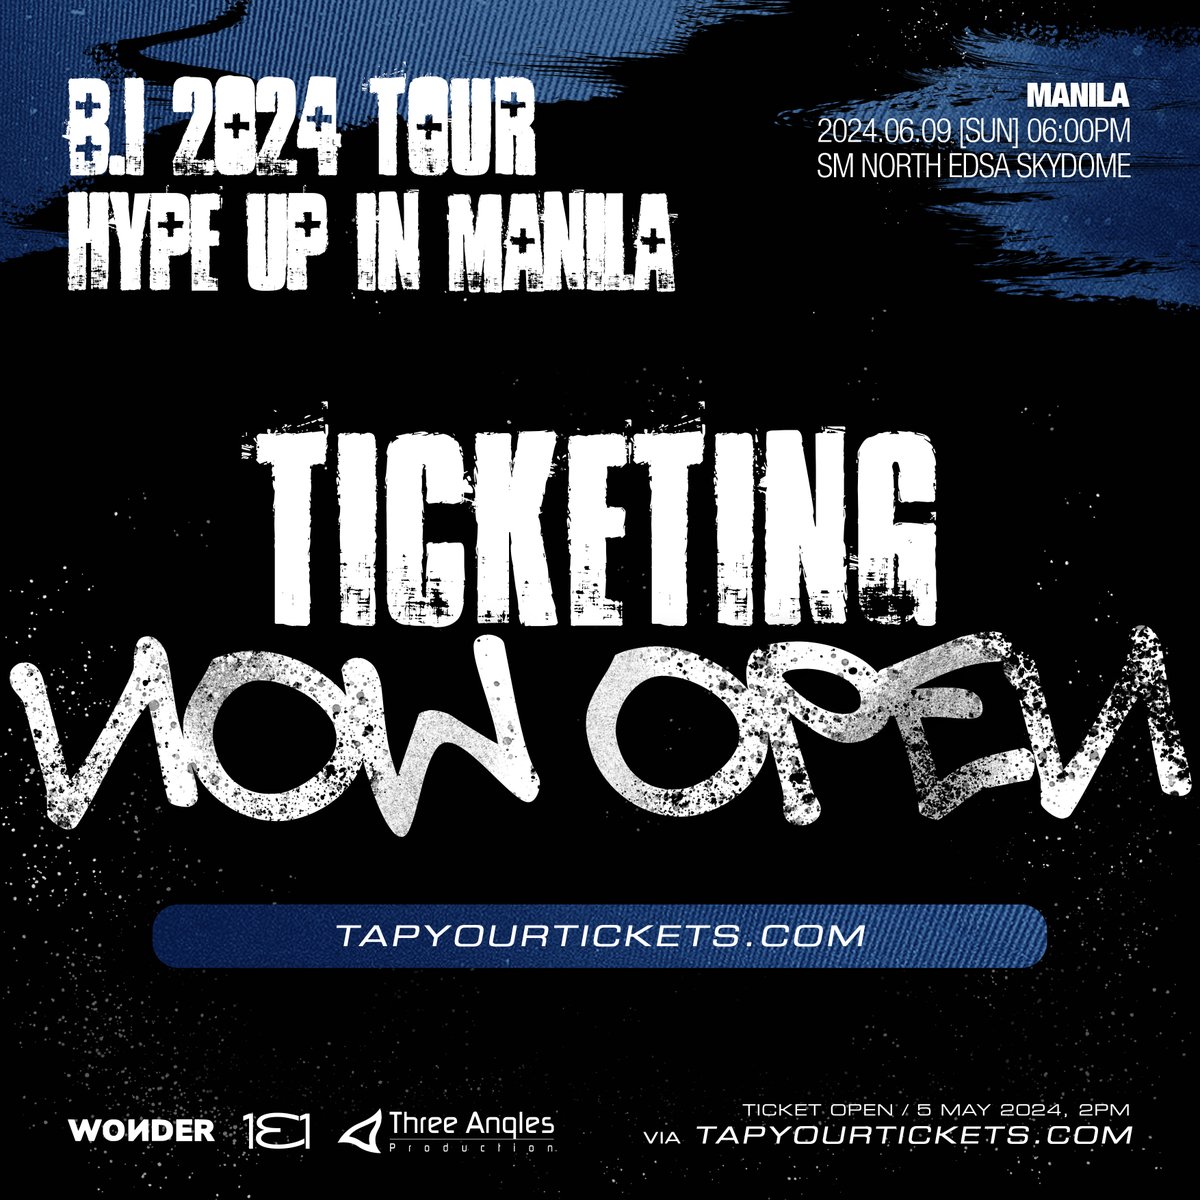 Tickets for the B.I 2024 TOUR “HYPE UP” IN MANILA are now open! 🎫 Grab your tickets now! 🛒🔗 tapyourtickets.com #BI #비아이 #HYPEUPinMNL #131LABEL #wondercoltd #TAP #ThreeAnglesProduction